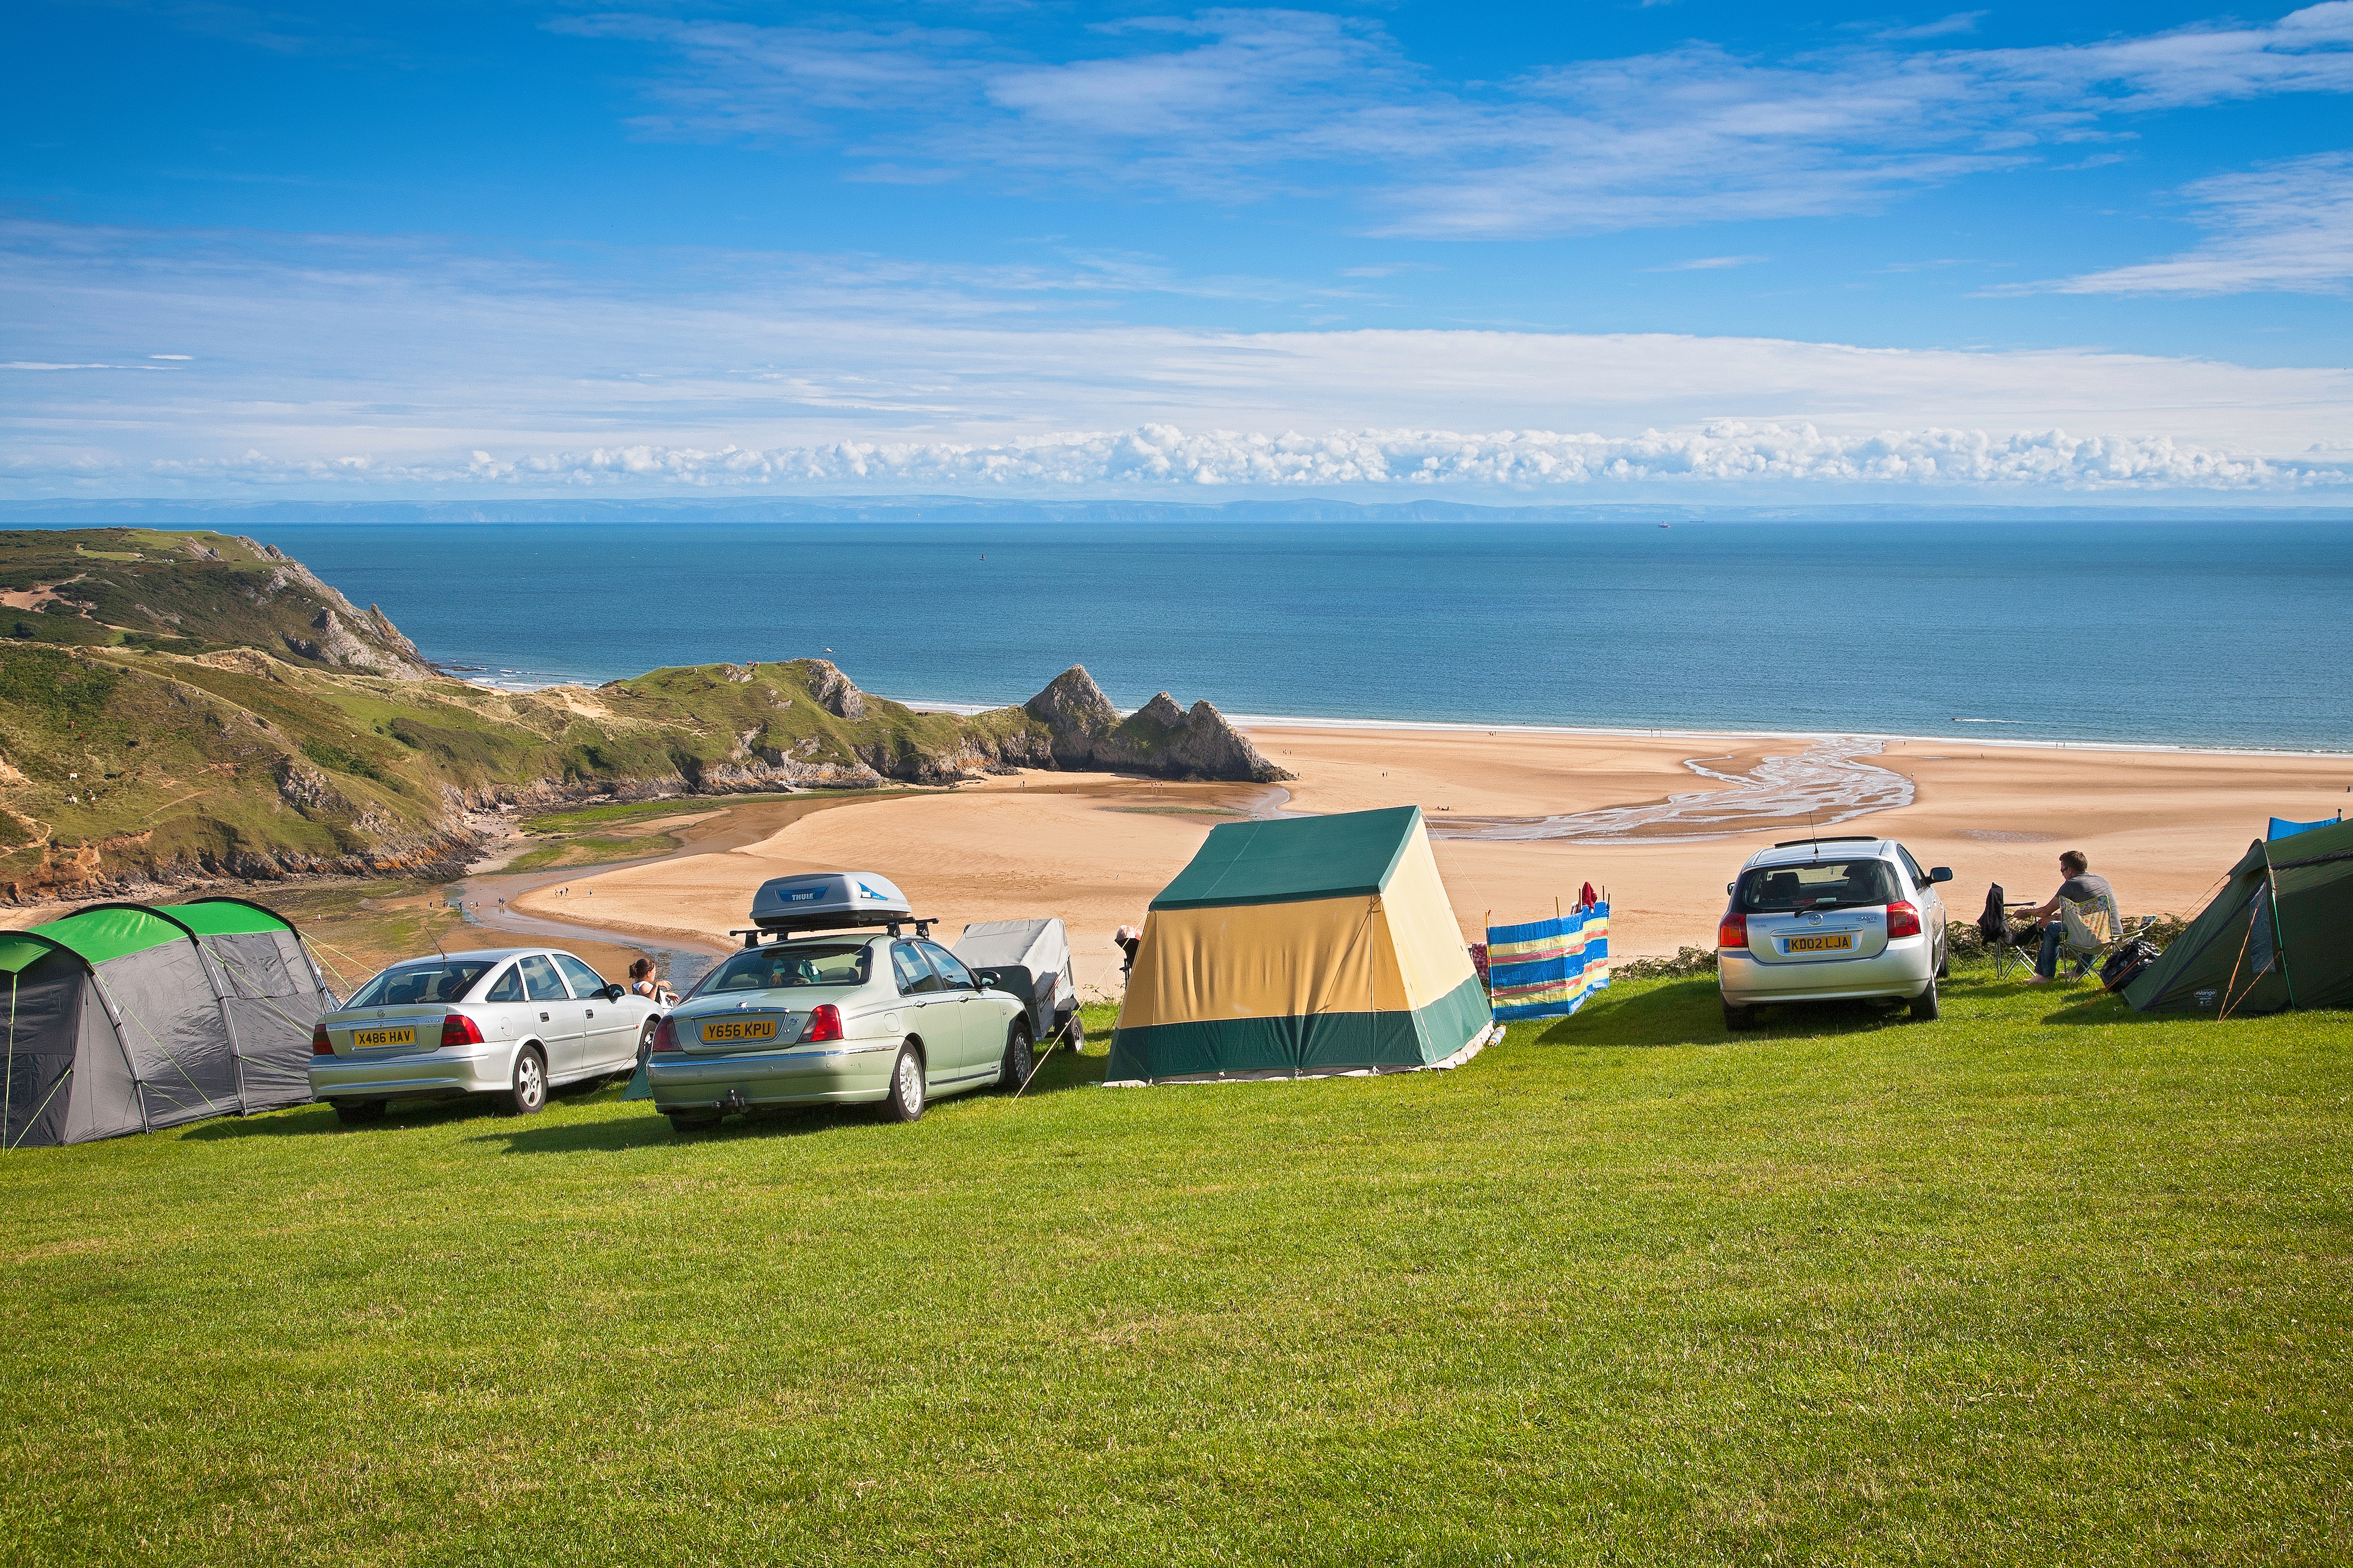 Three Cliffs Bay is one of the top beaches in Wales